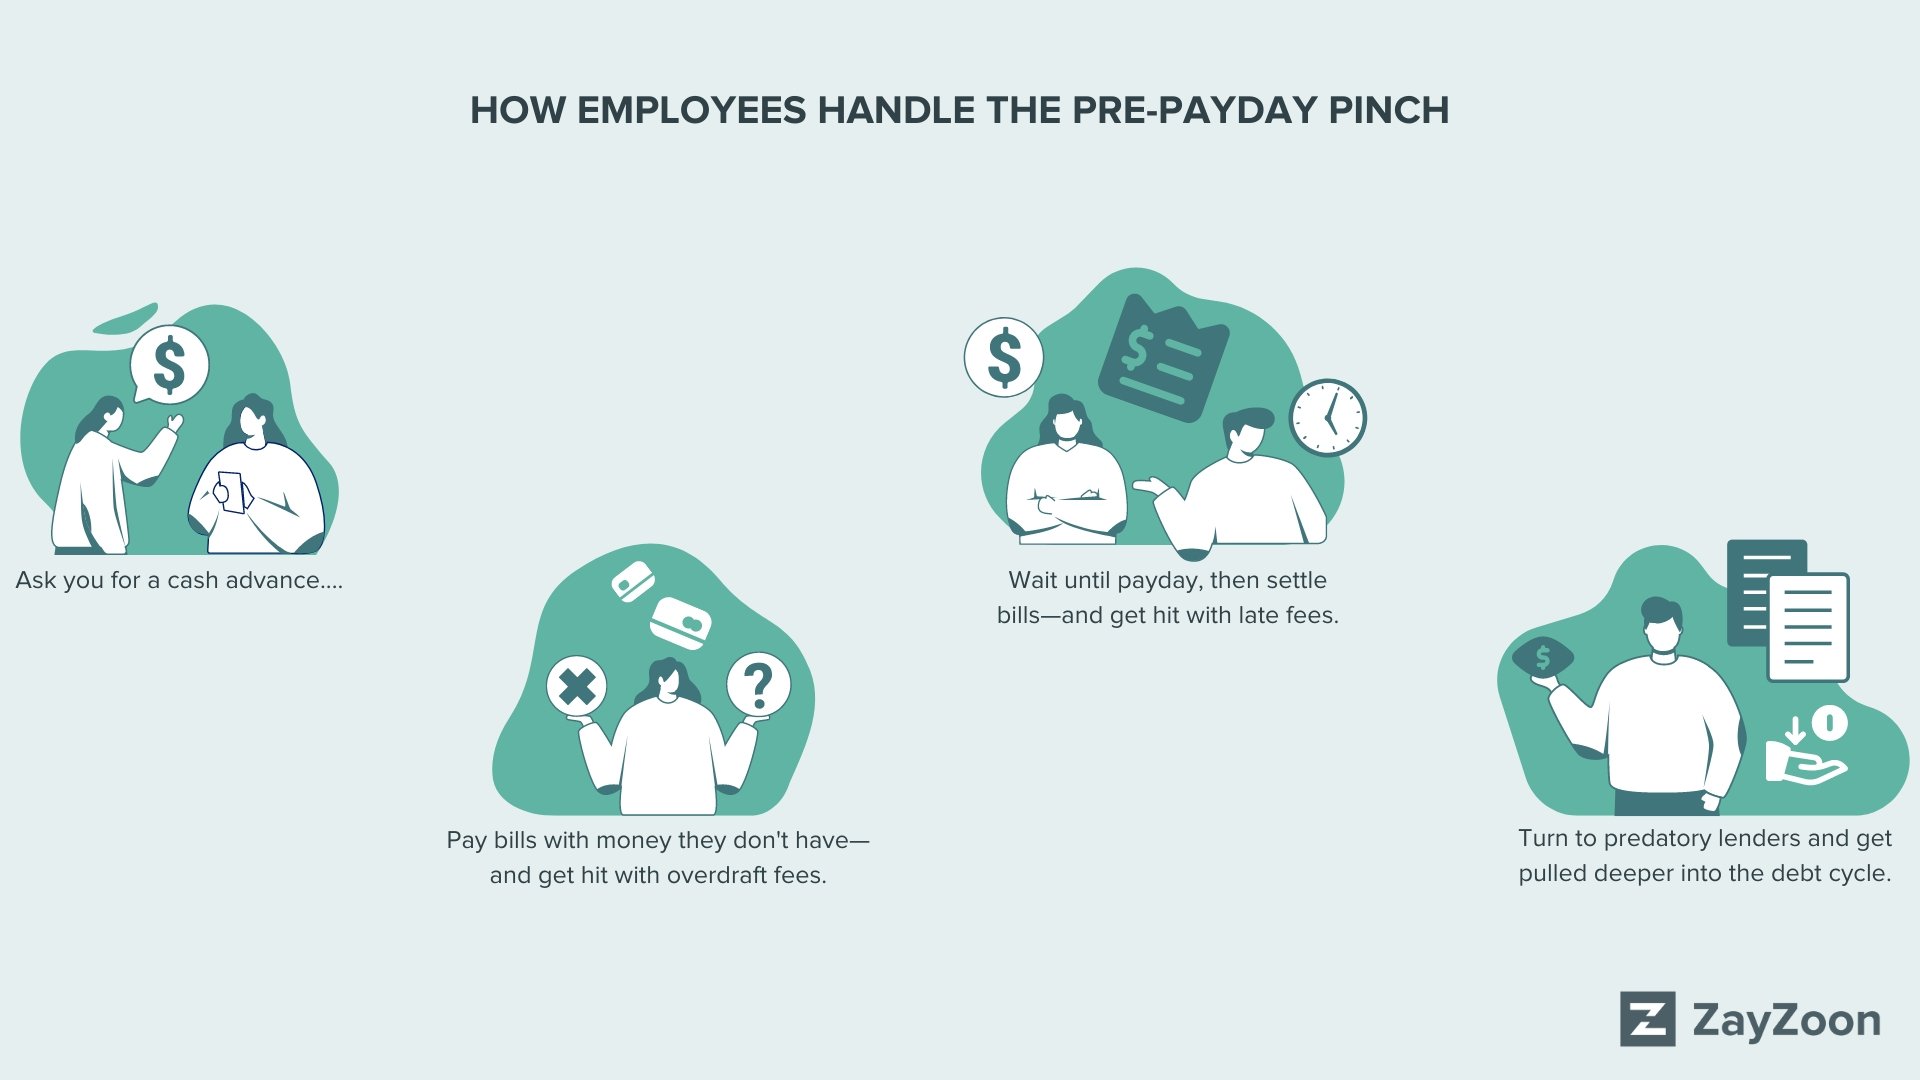 Infographic entitled: "How employees handle the pre-payday pinch." First illustration depicts a woman asking her HR business partner for a cash advance. Second illustration depicts a woman deciding whether she should pay off a bill with money she doesn't have and get charged with an overdraft fee. Third illustration depicts a woman waiting until payday to settle an overdue bill and getting charged with a late fee. Fourth illustration depicts a predatory lender and the negative consequences of taking out a high-interest loan.